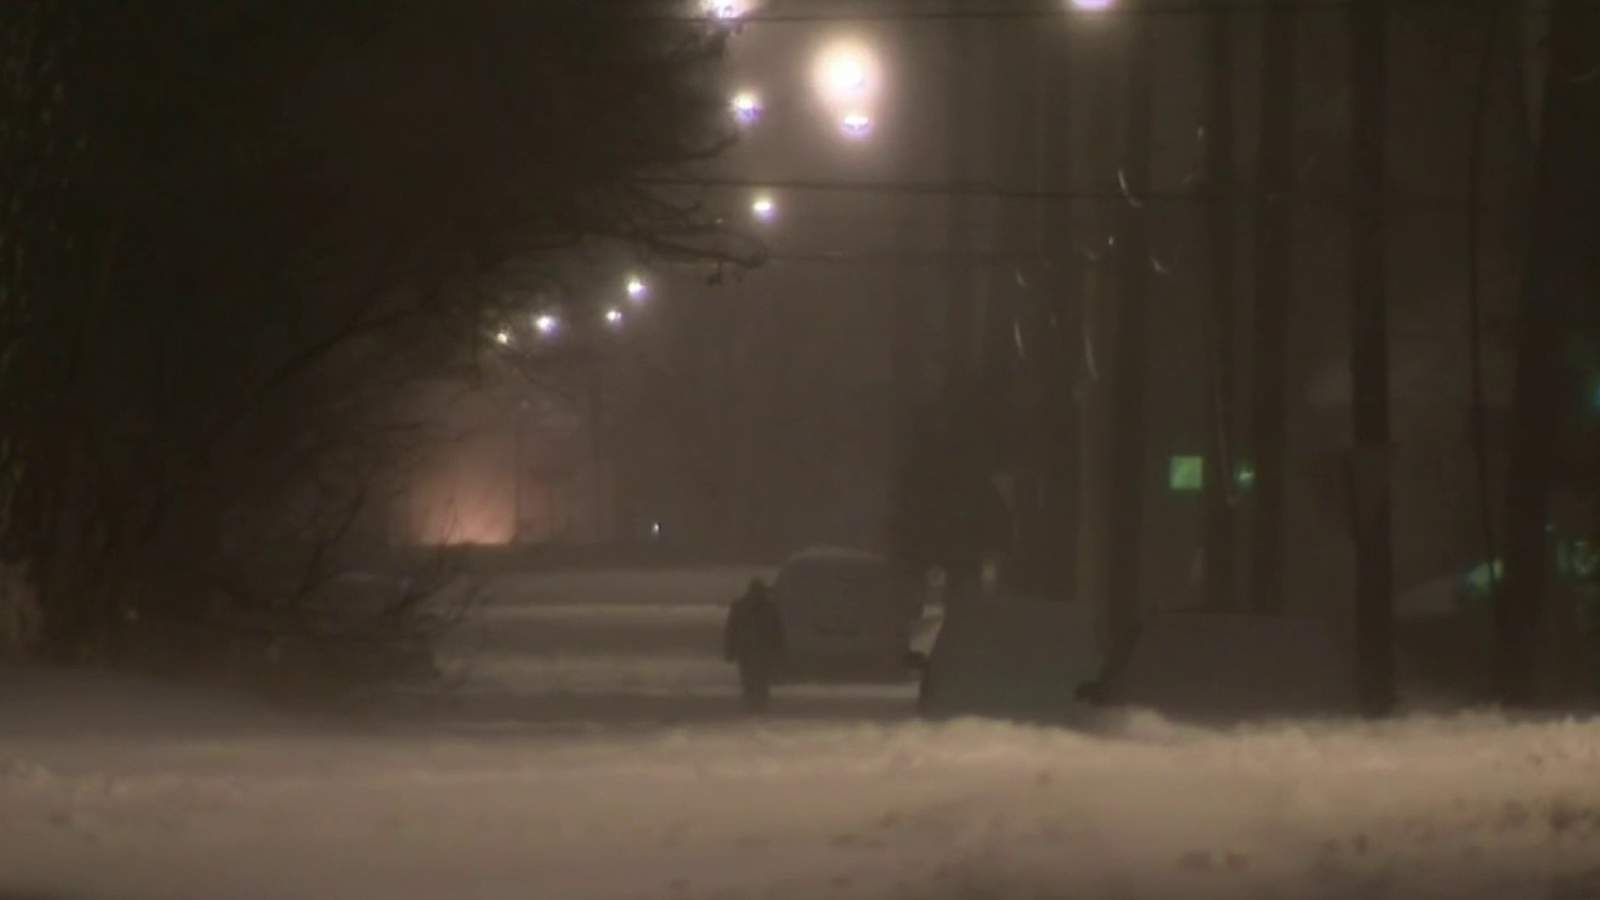 City of Detroit to plow residential streets Tuesday morning